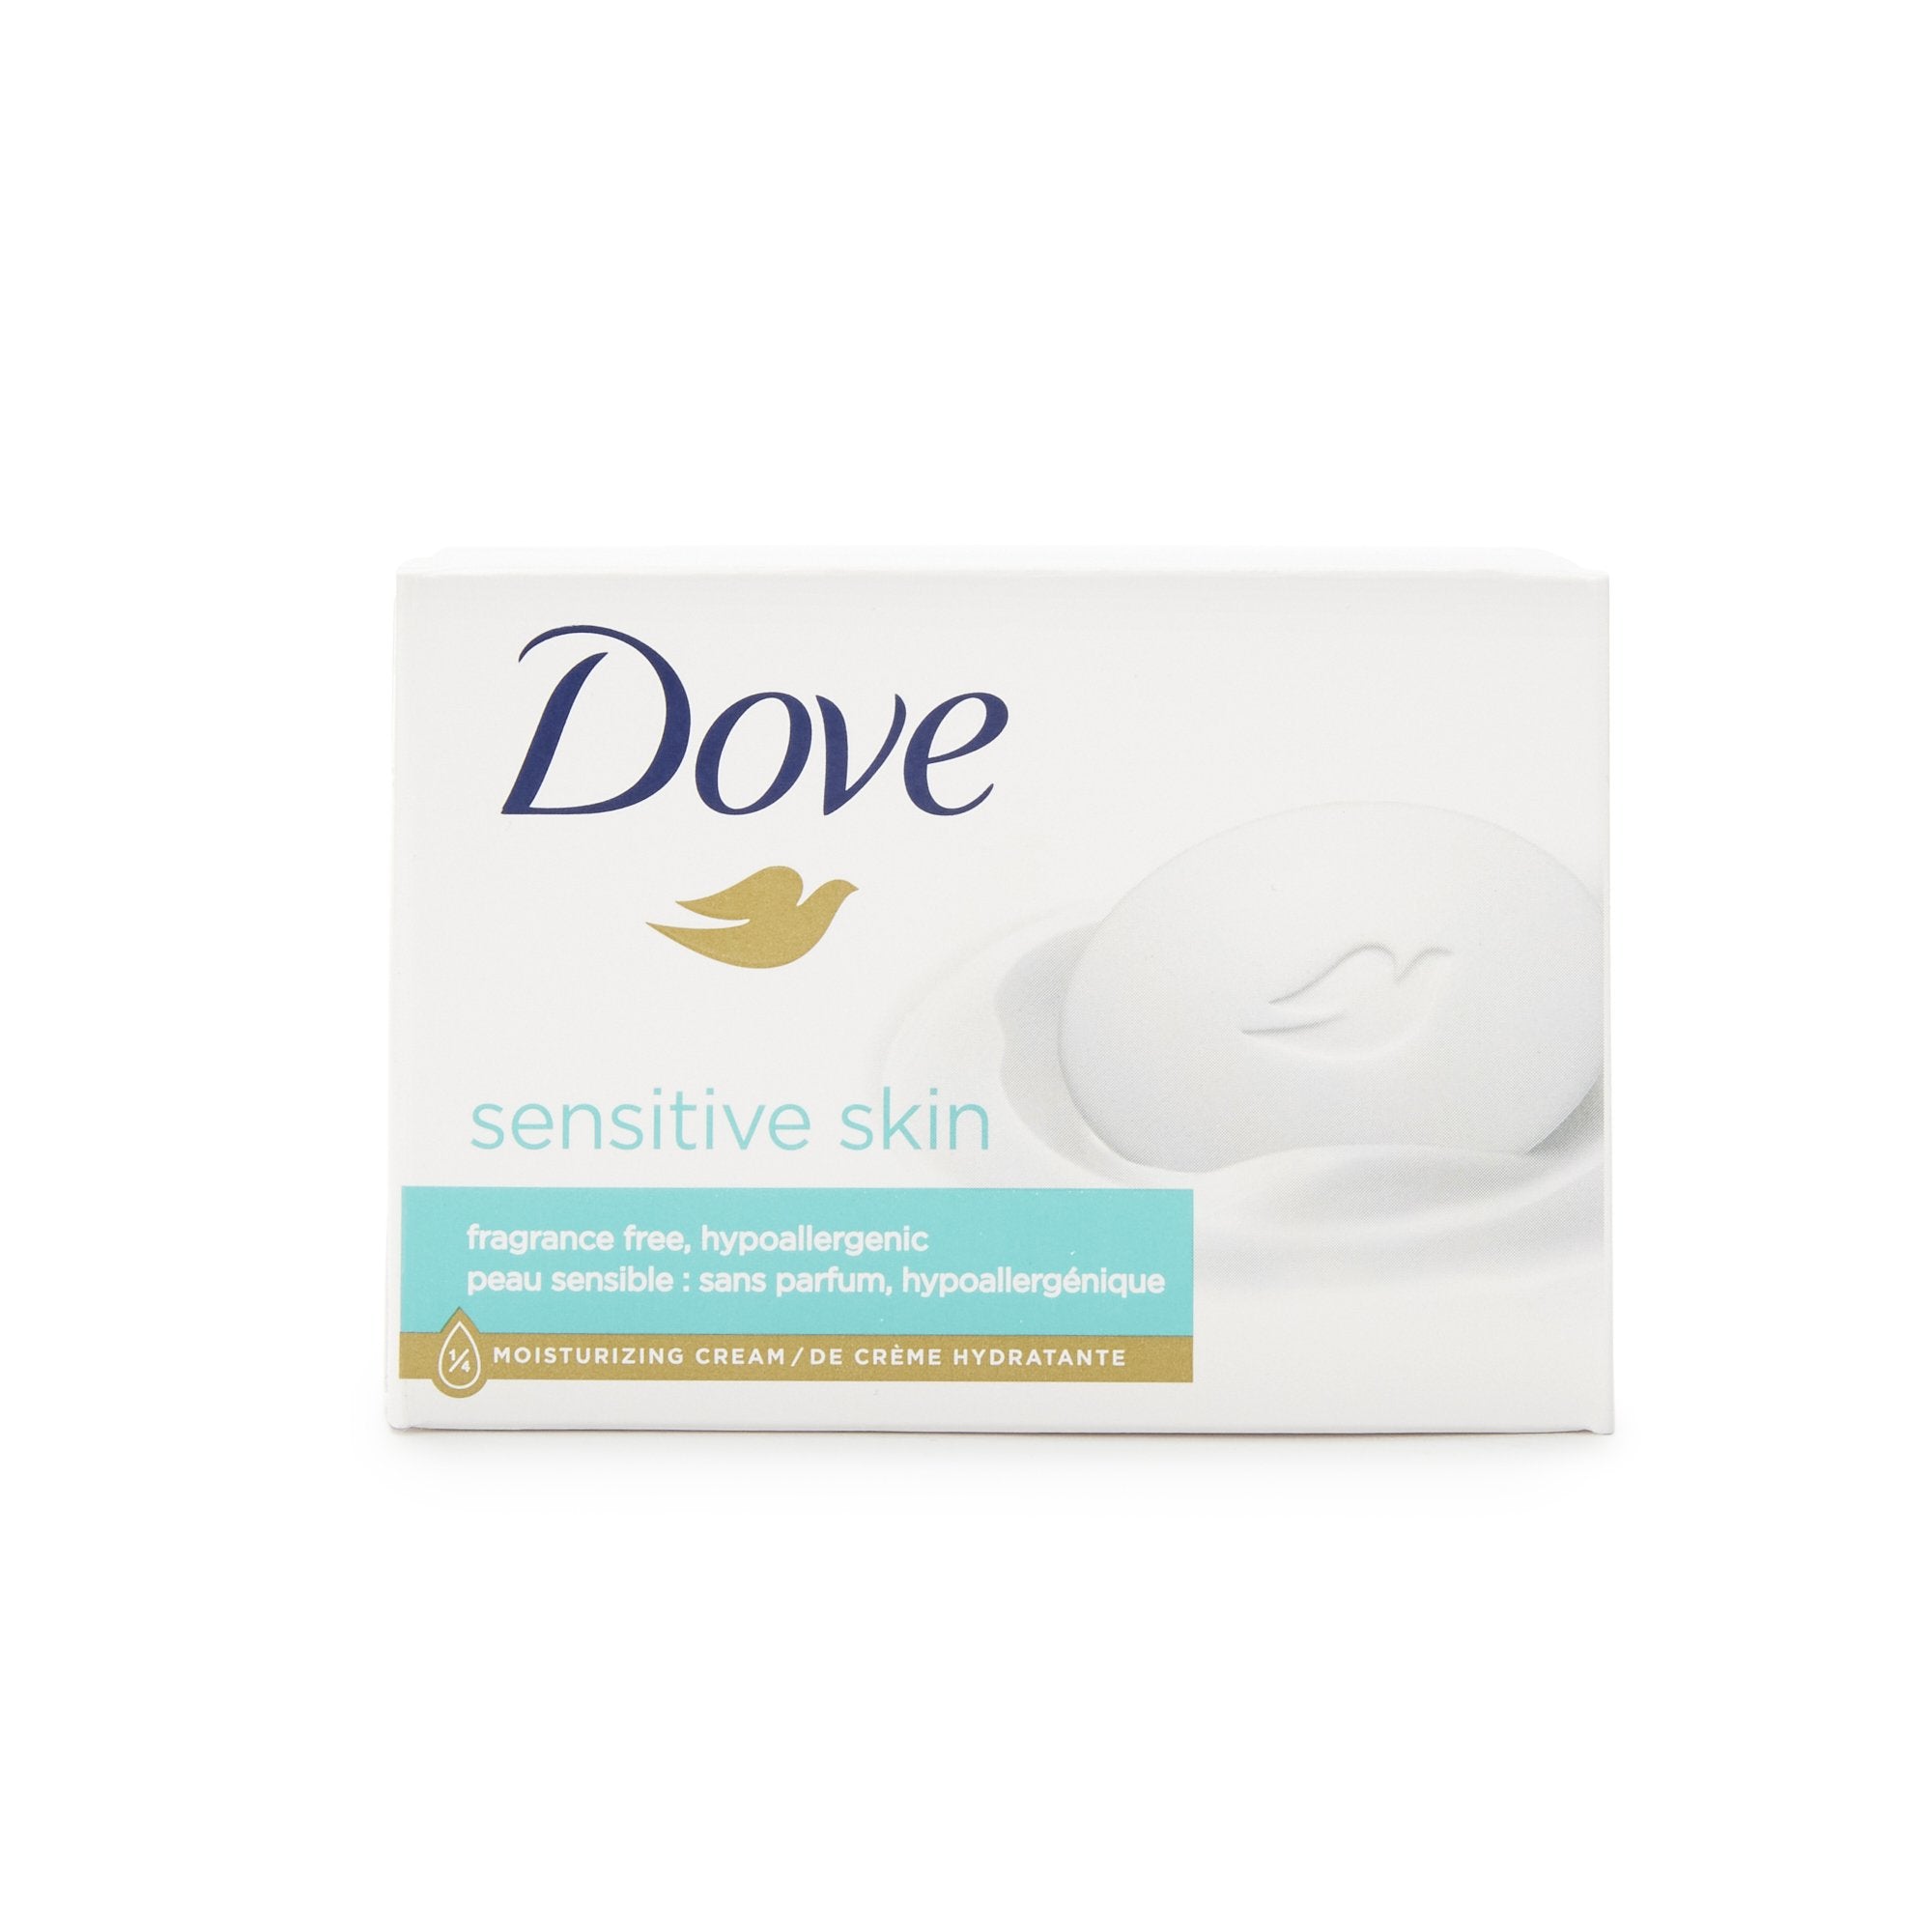 Soap Dove Sensitive Skin Bar 4.5 oz. Individually Wrapped Unscented